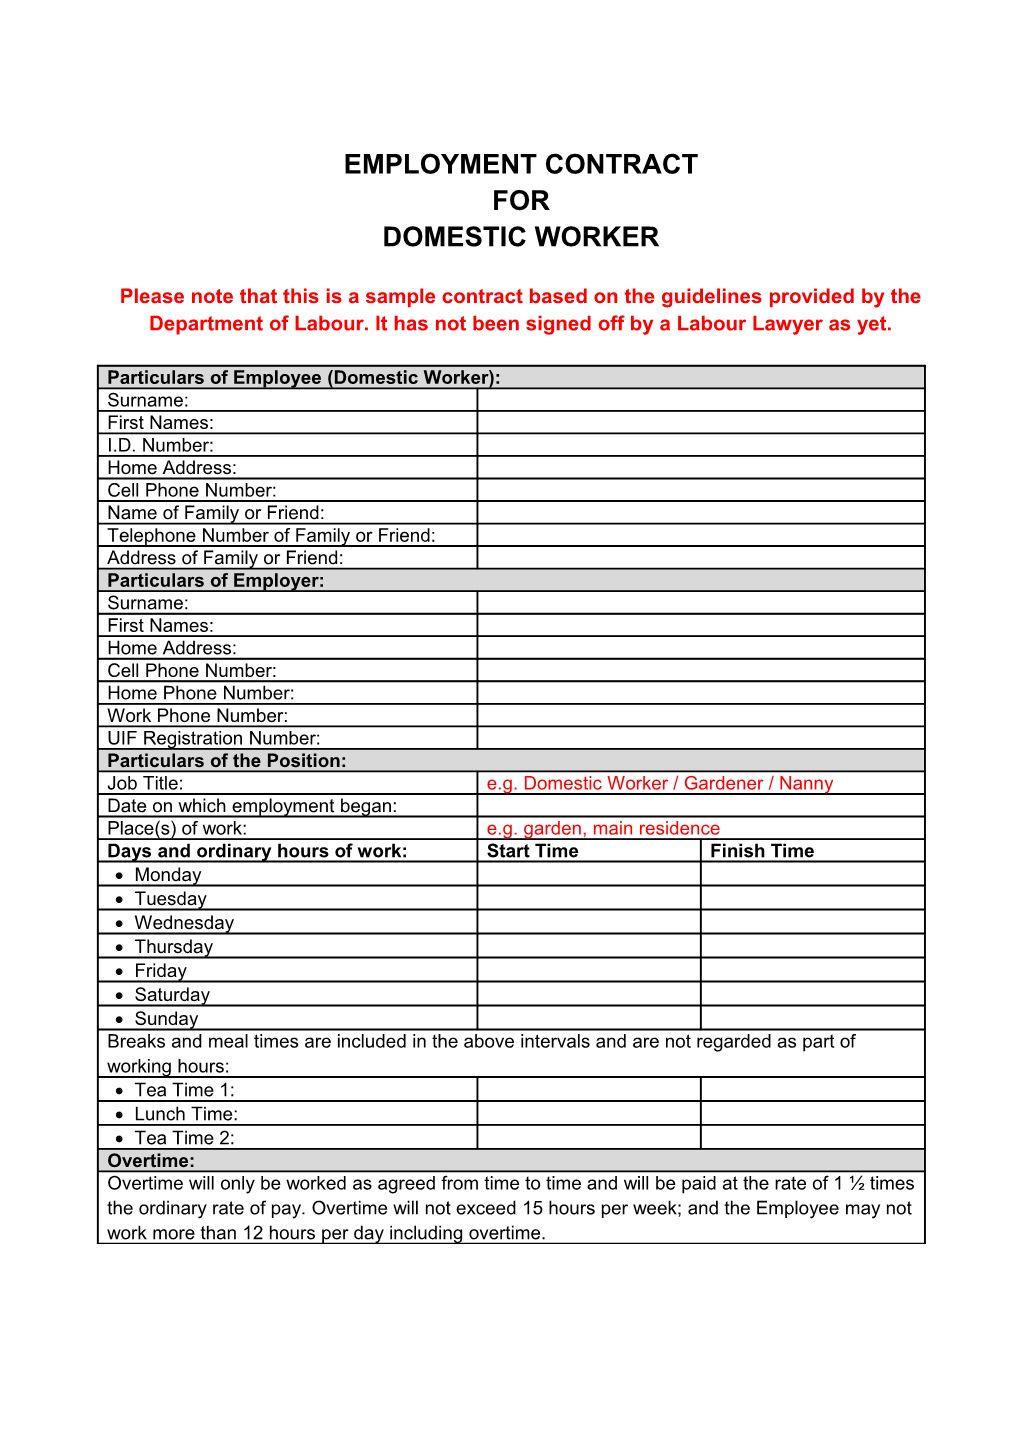 Contract of Employment for Domestic Worker